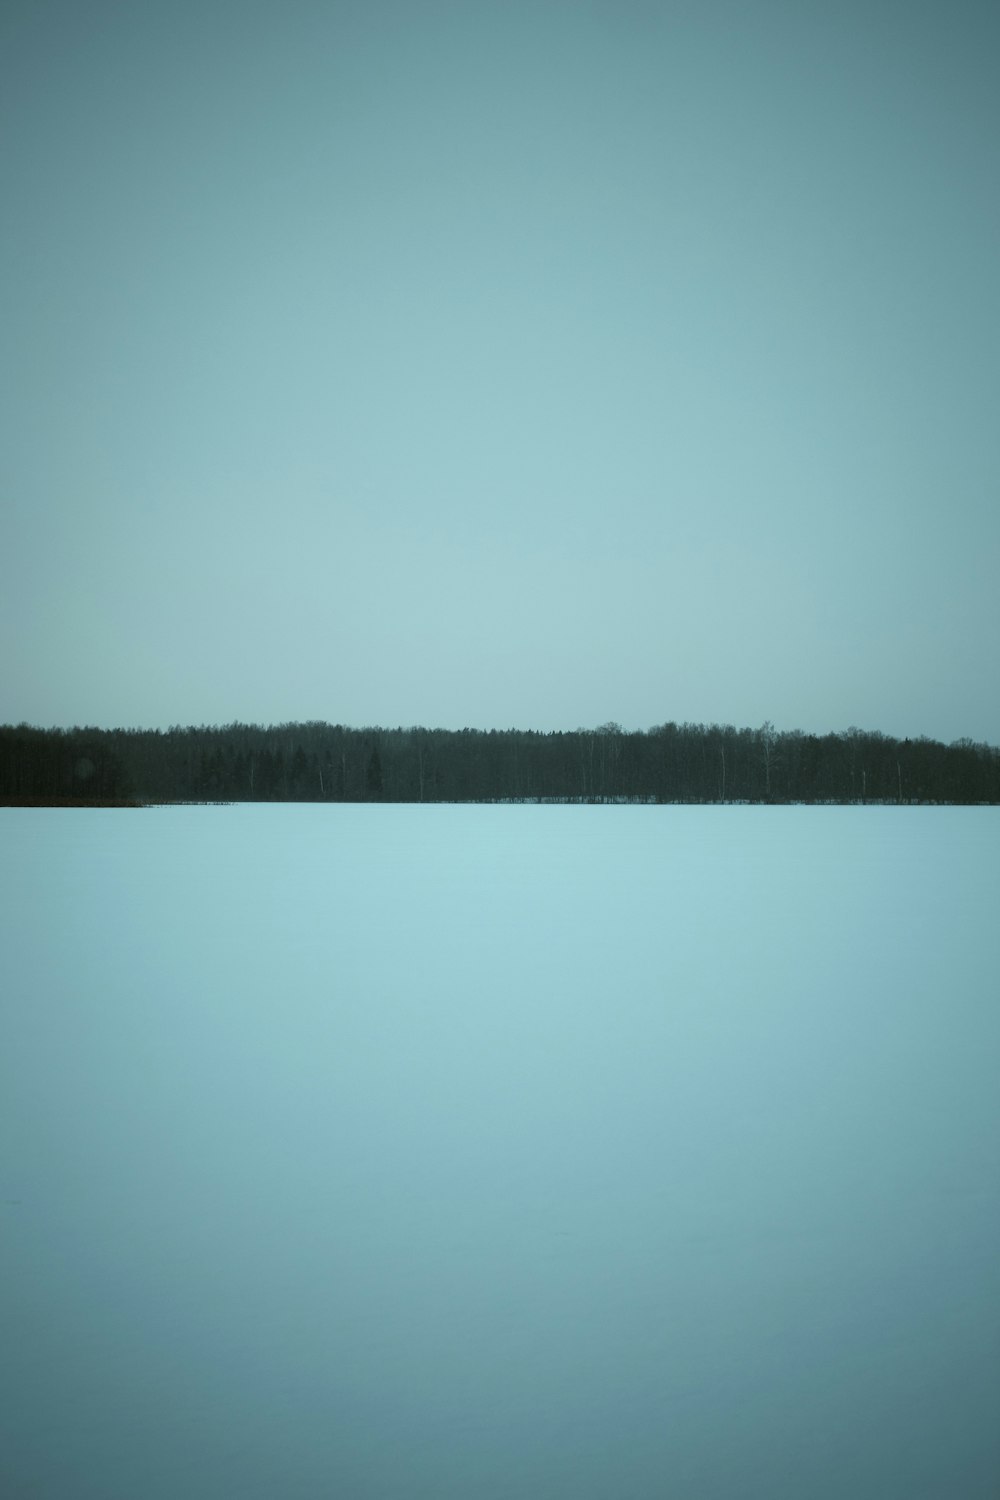 a large body of water with trees in the distance